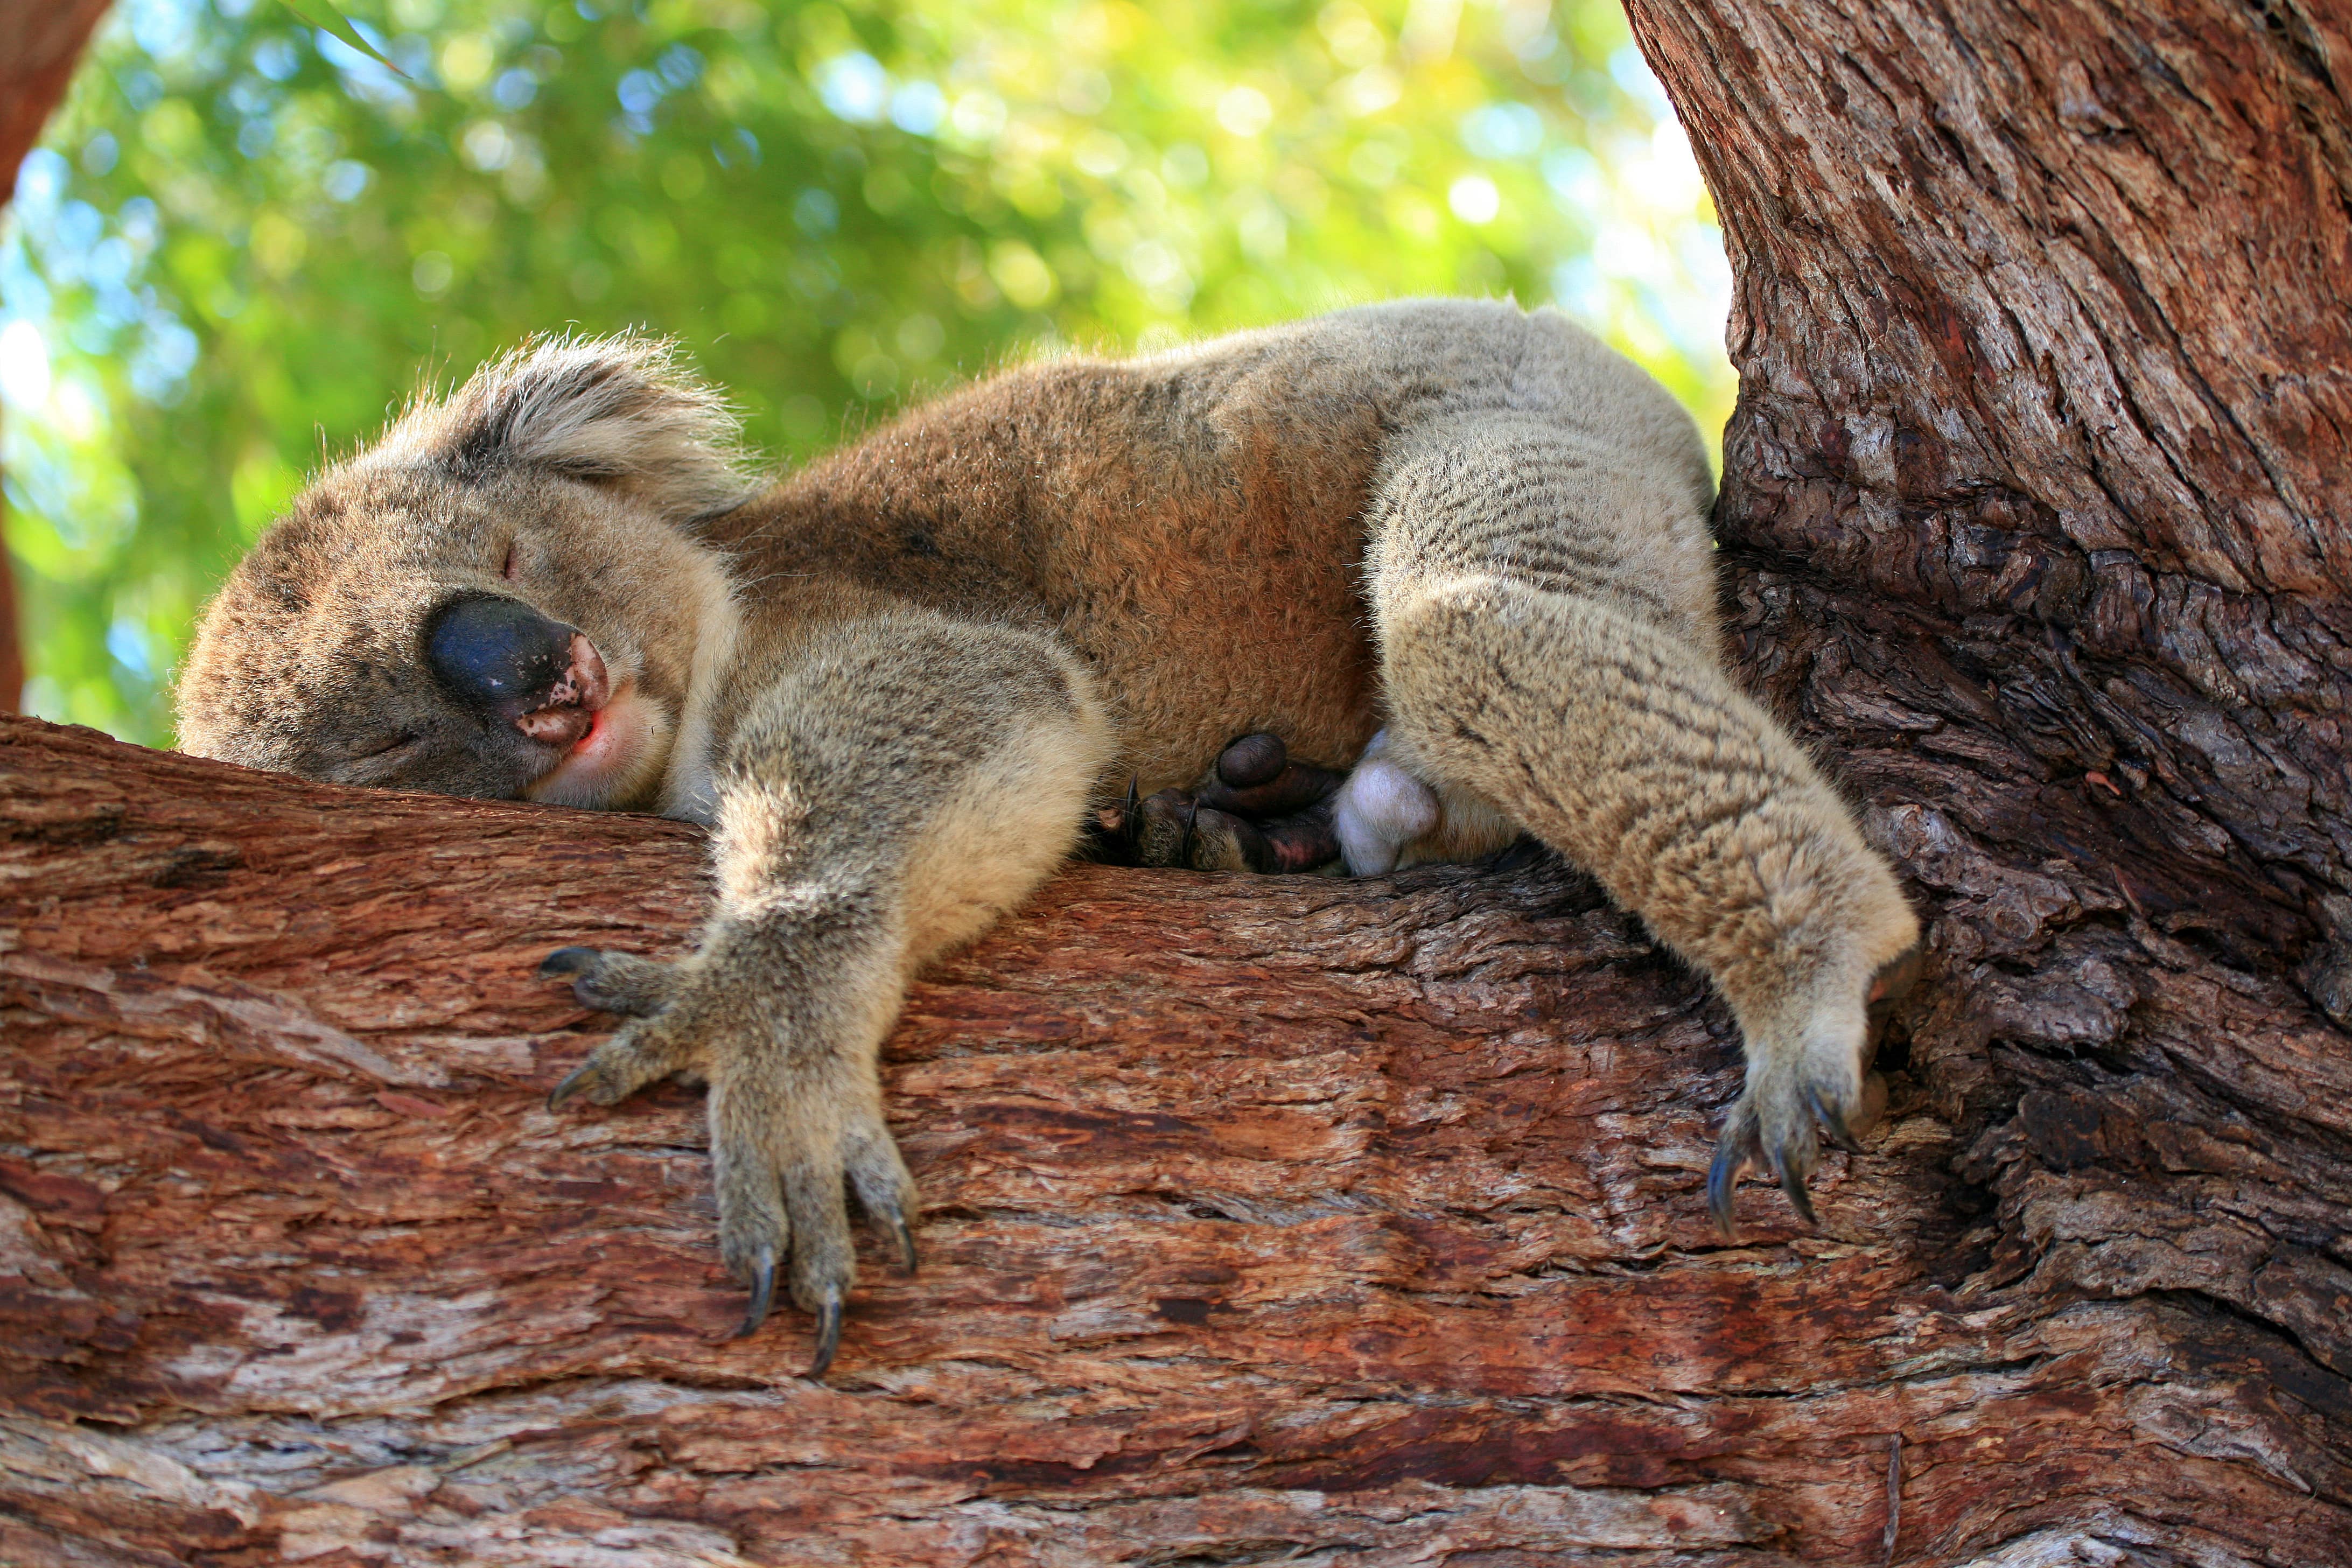 A koala snoozing on its side in a tree